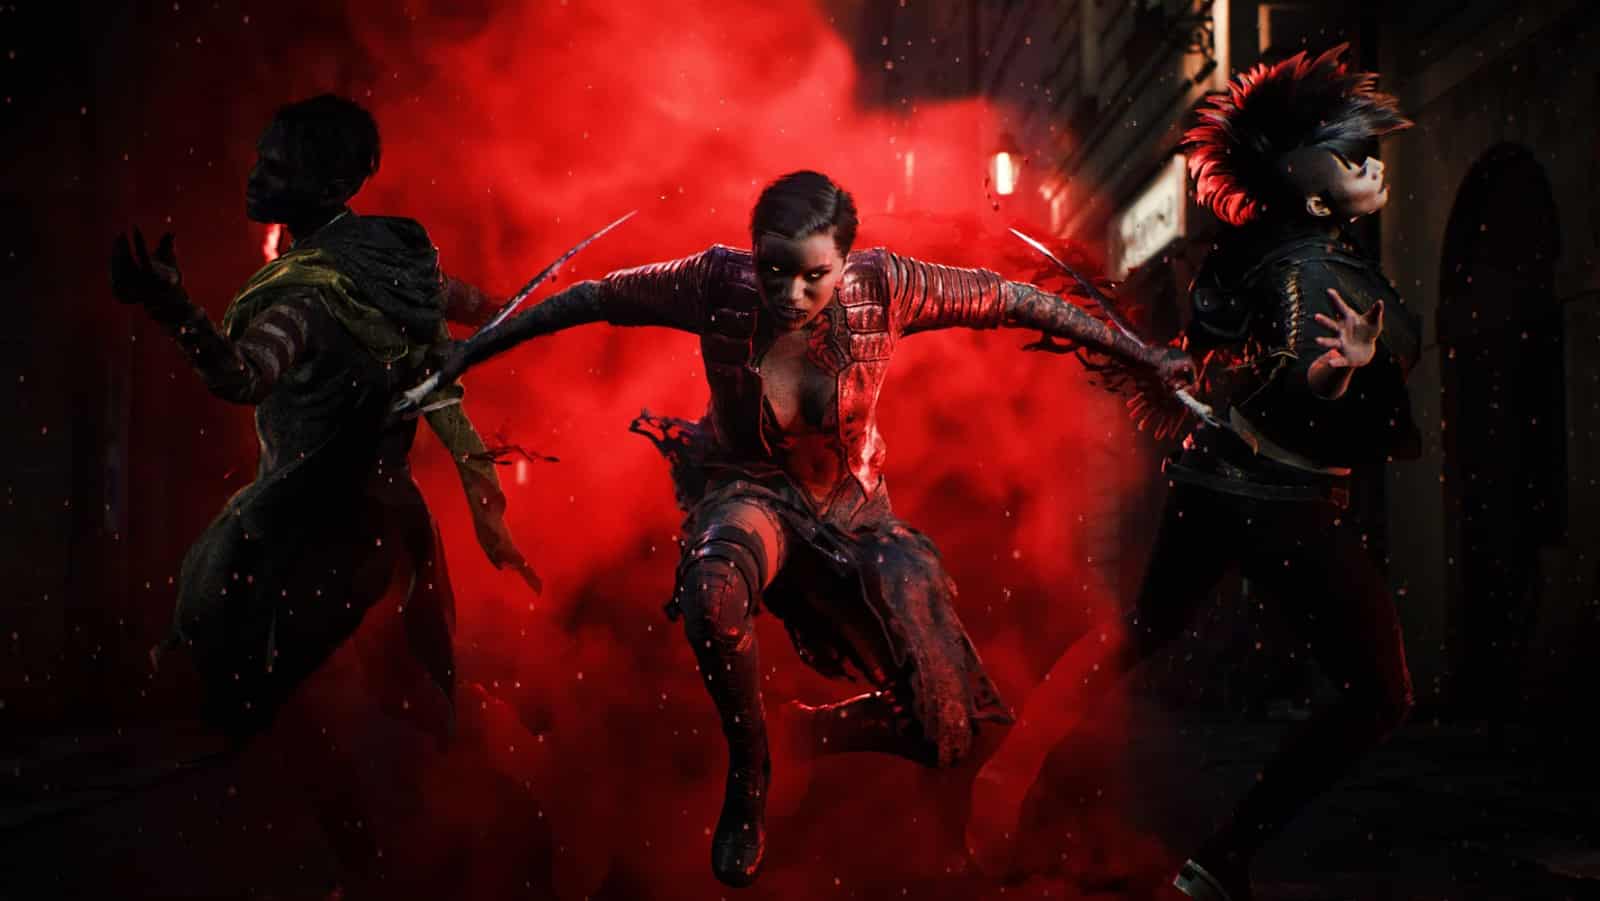 vampire the masquerade vtm bloodhunt toreador with katanas appears from red mist pushing female brujah aside